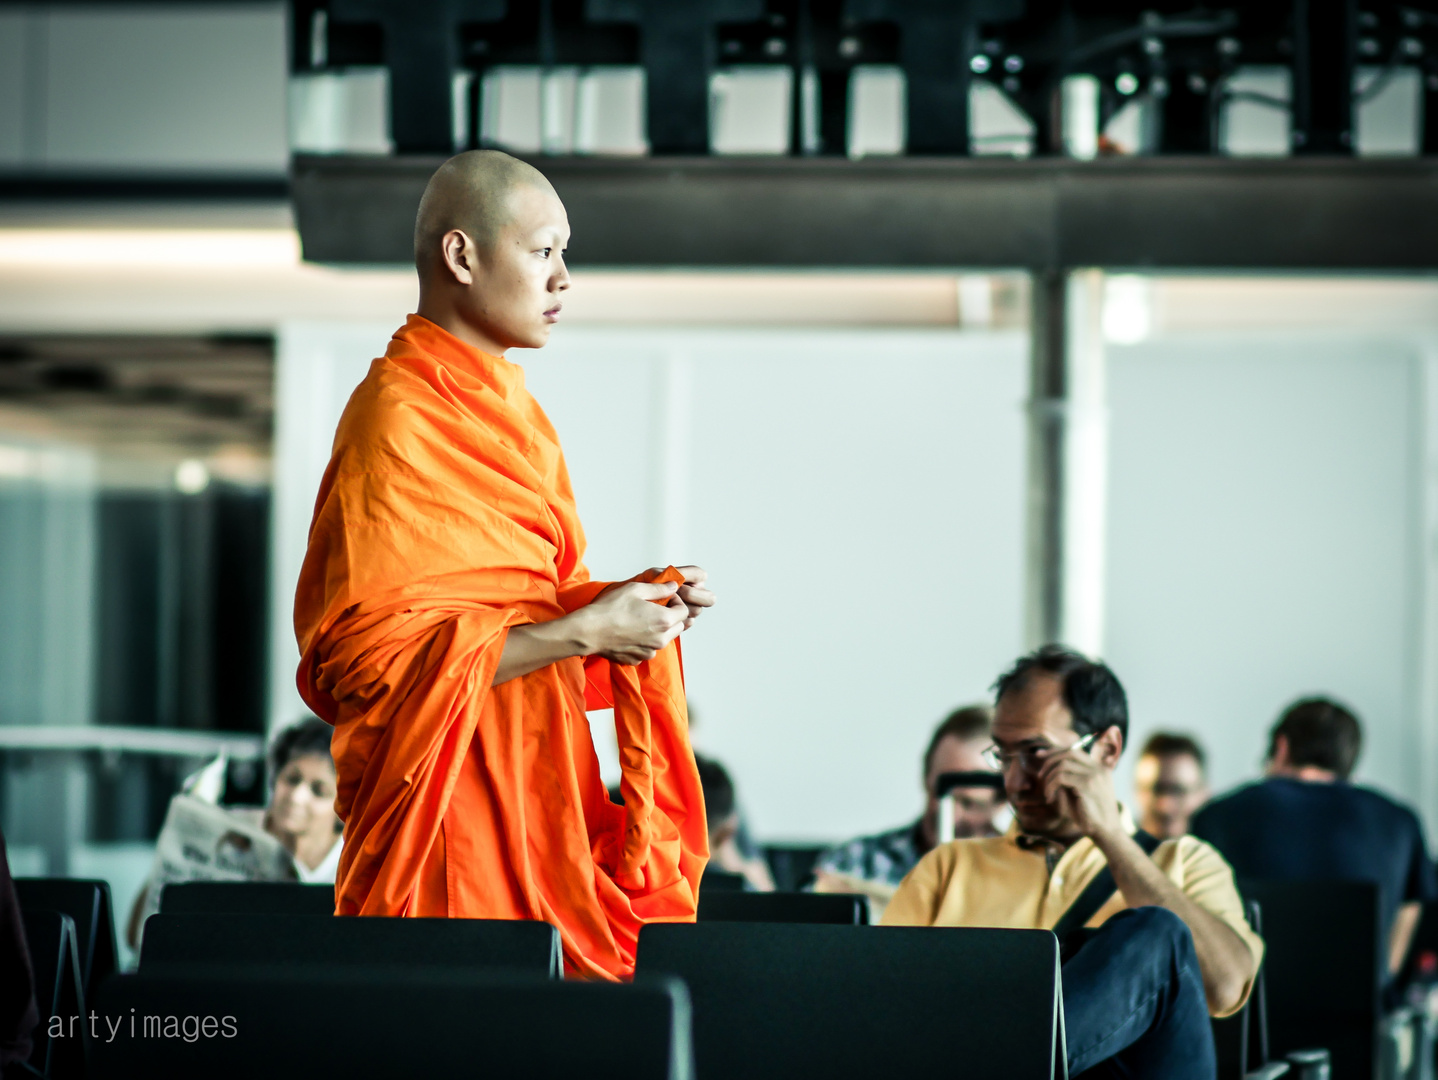 monk at the airport